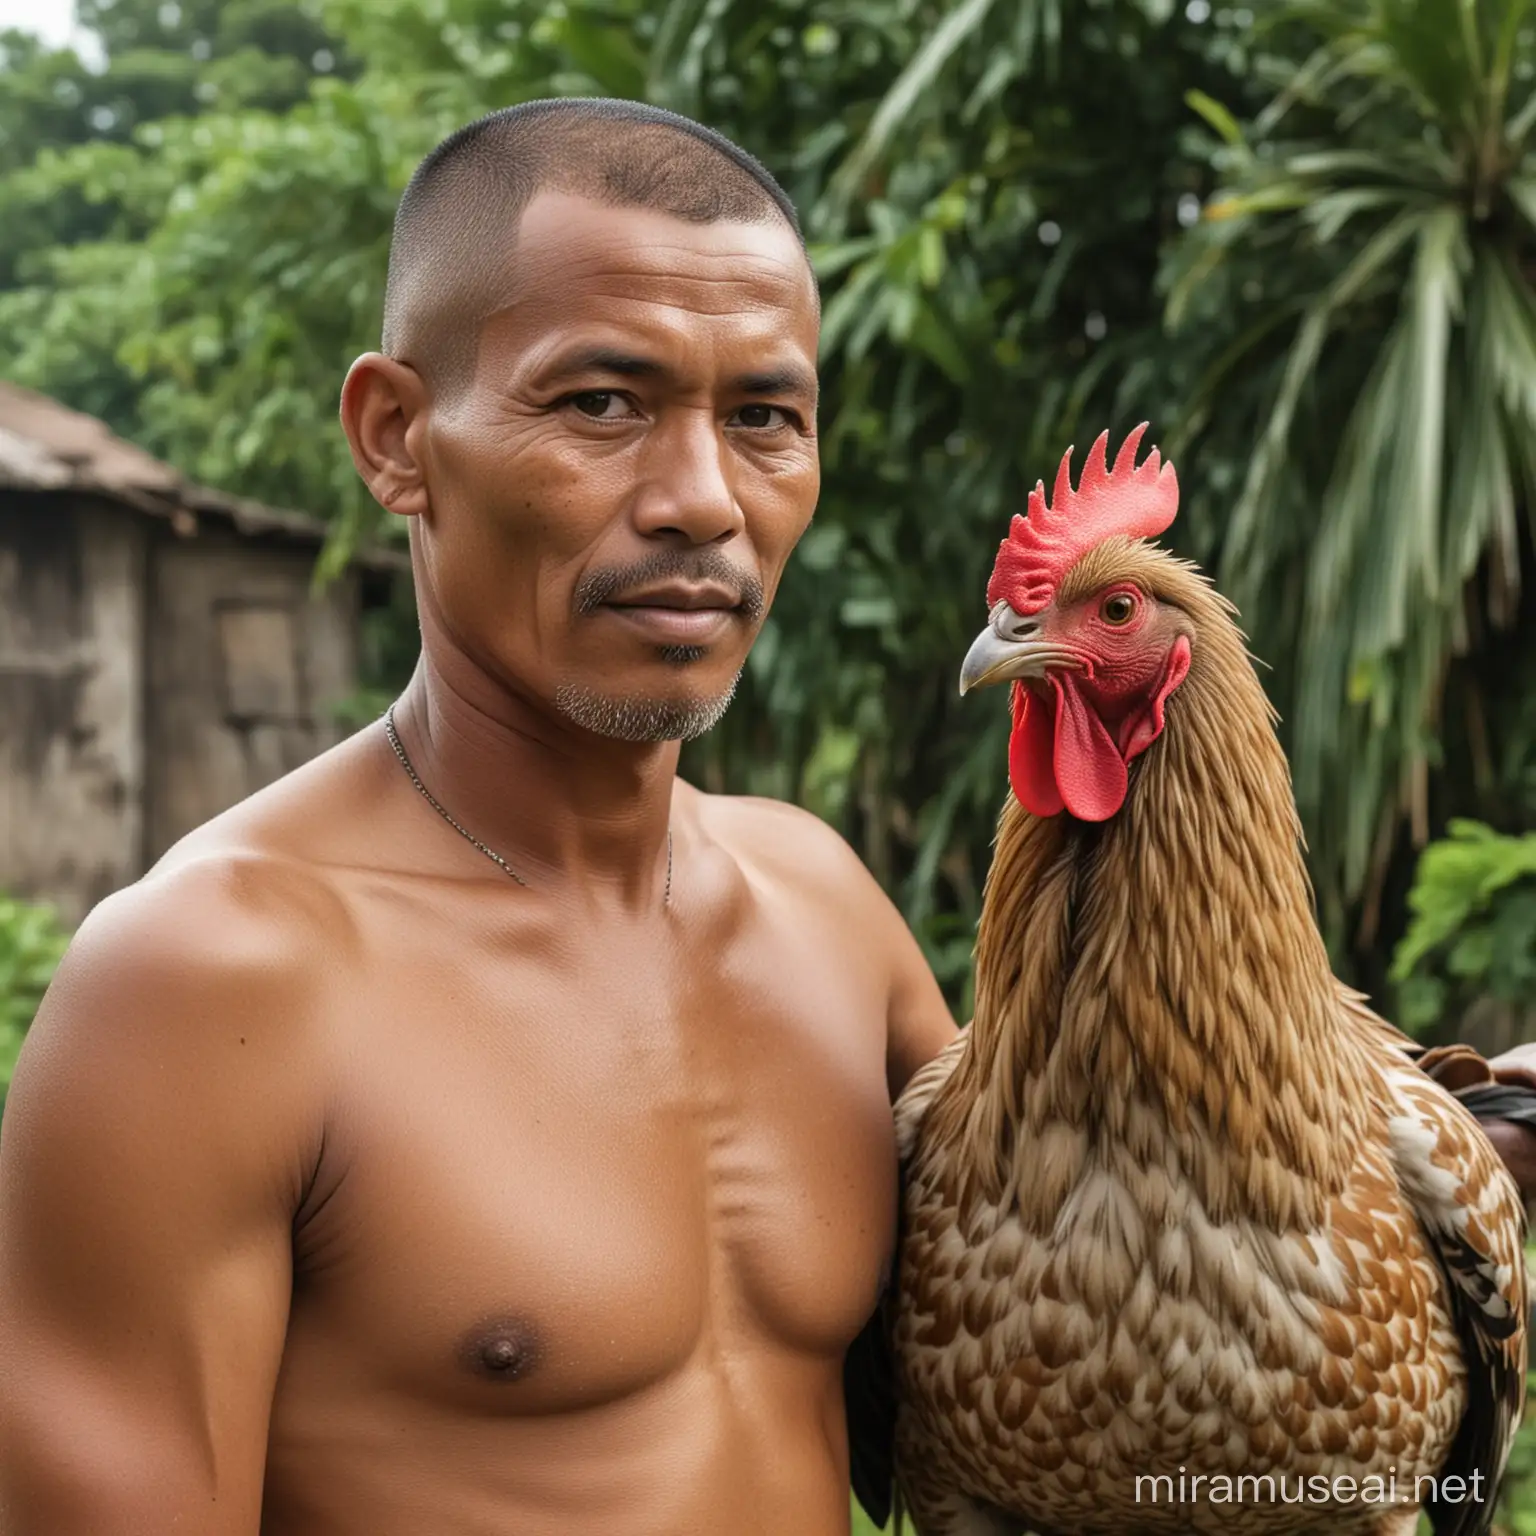 Mature Indonesian Man with Buzz Cut Holding Rooster